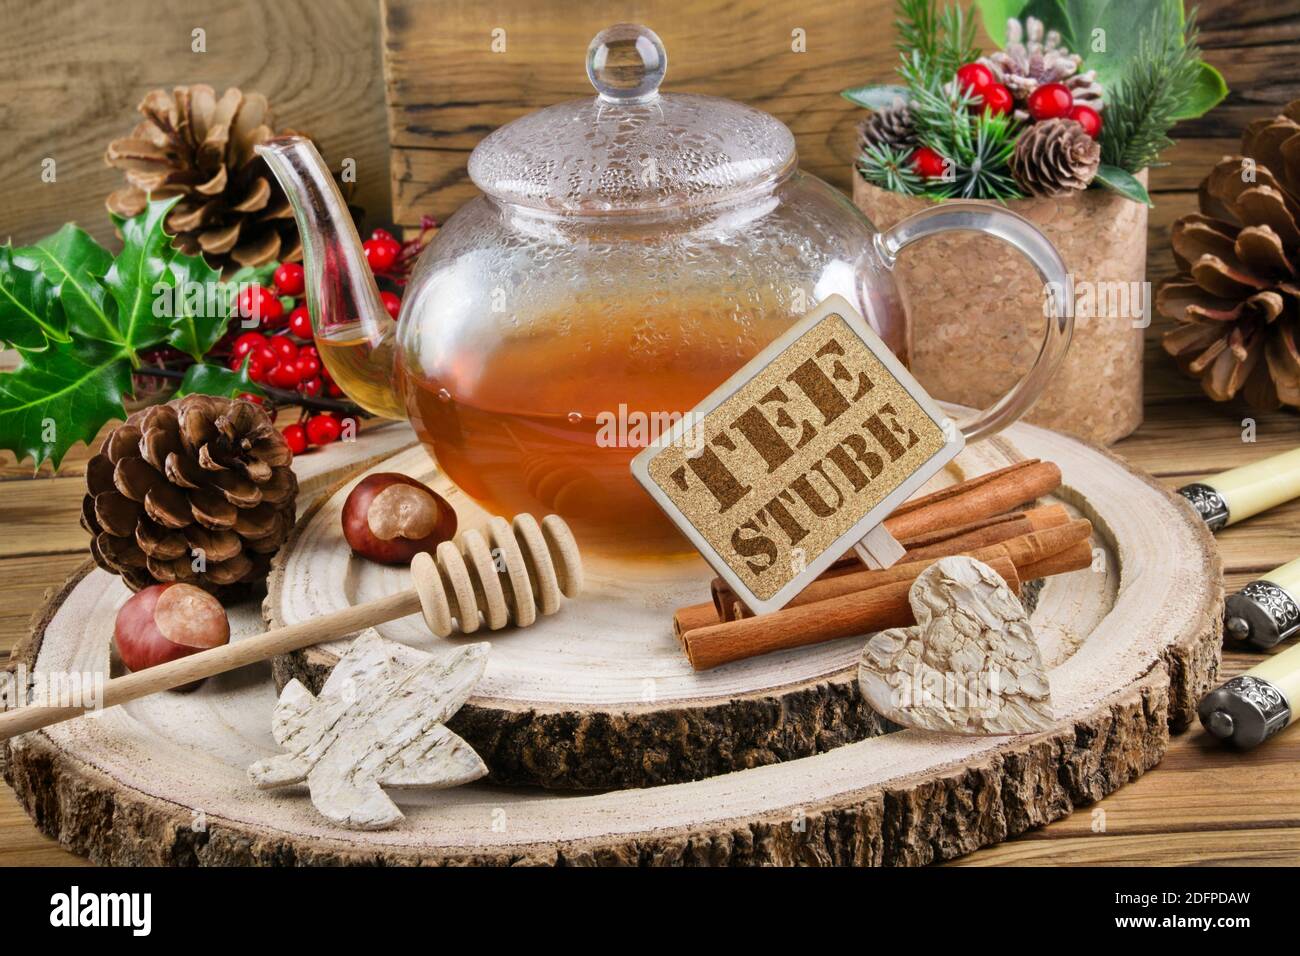 Teekanne Glas High Resolution Stock Photography and Images - Alamy